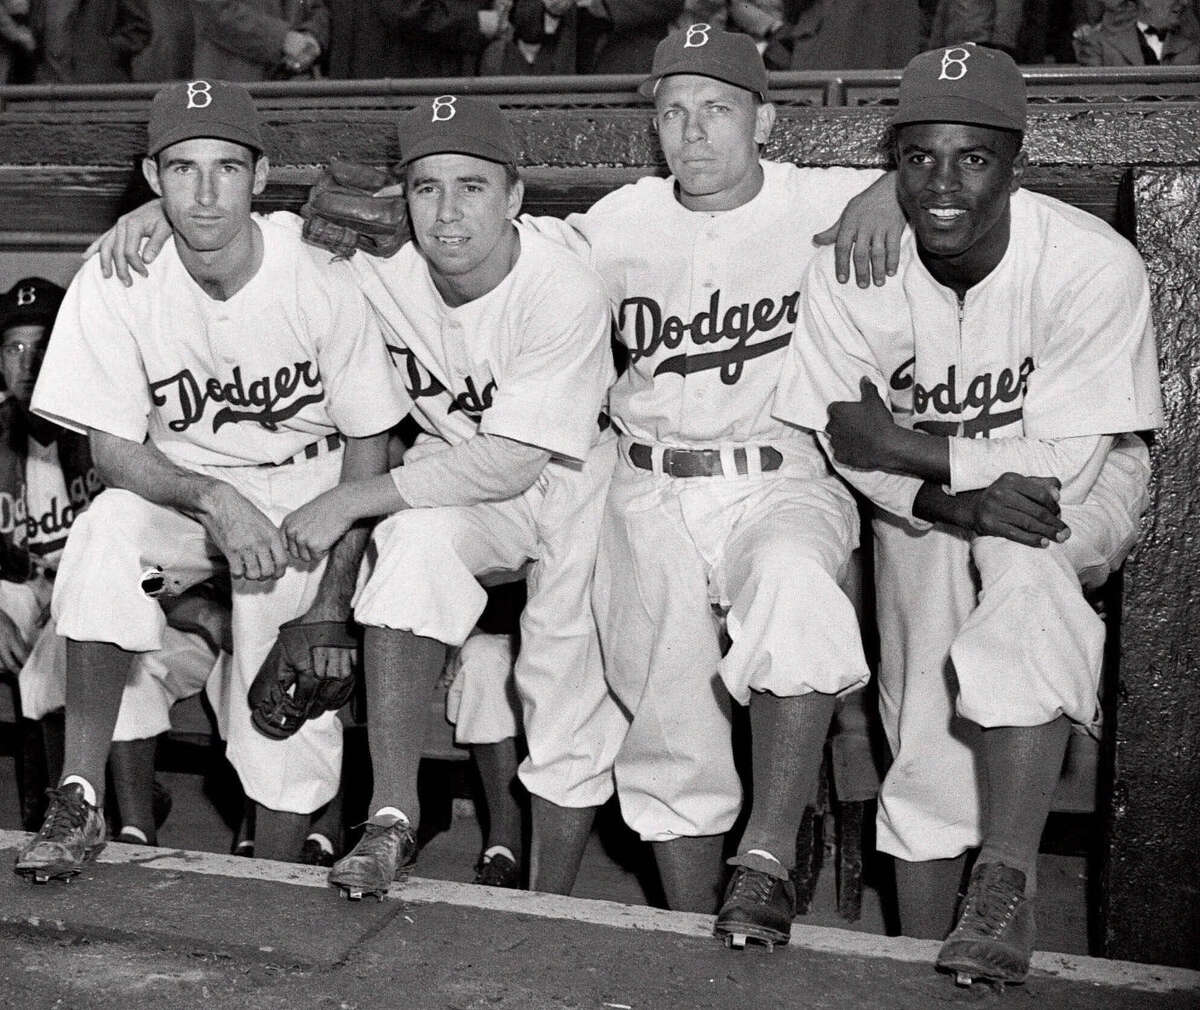 FILE - In this April 15, 1947, file photo, from left, Brooklyn Dodgers baseball players John Jorgensen, Pee Wee Reese, Ed Stanky and Jackie Robinson pose at Ebbets Field in New York. The first statue in Dodger Stadium history belongs to Jackie Robinson. The team will unveil his likeness during Jackie Robinson Day festivities on Saturday, April 15, 2017, with his wife and extended family in attendance on the 70th anniversary of him breaking baseball's color barrier (AP Photo, File)